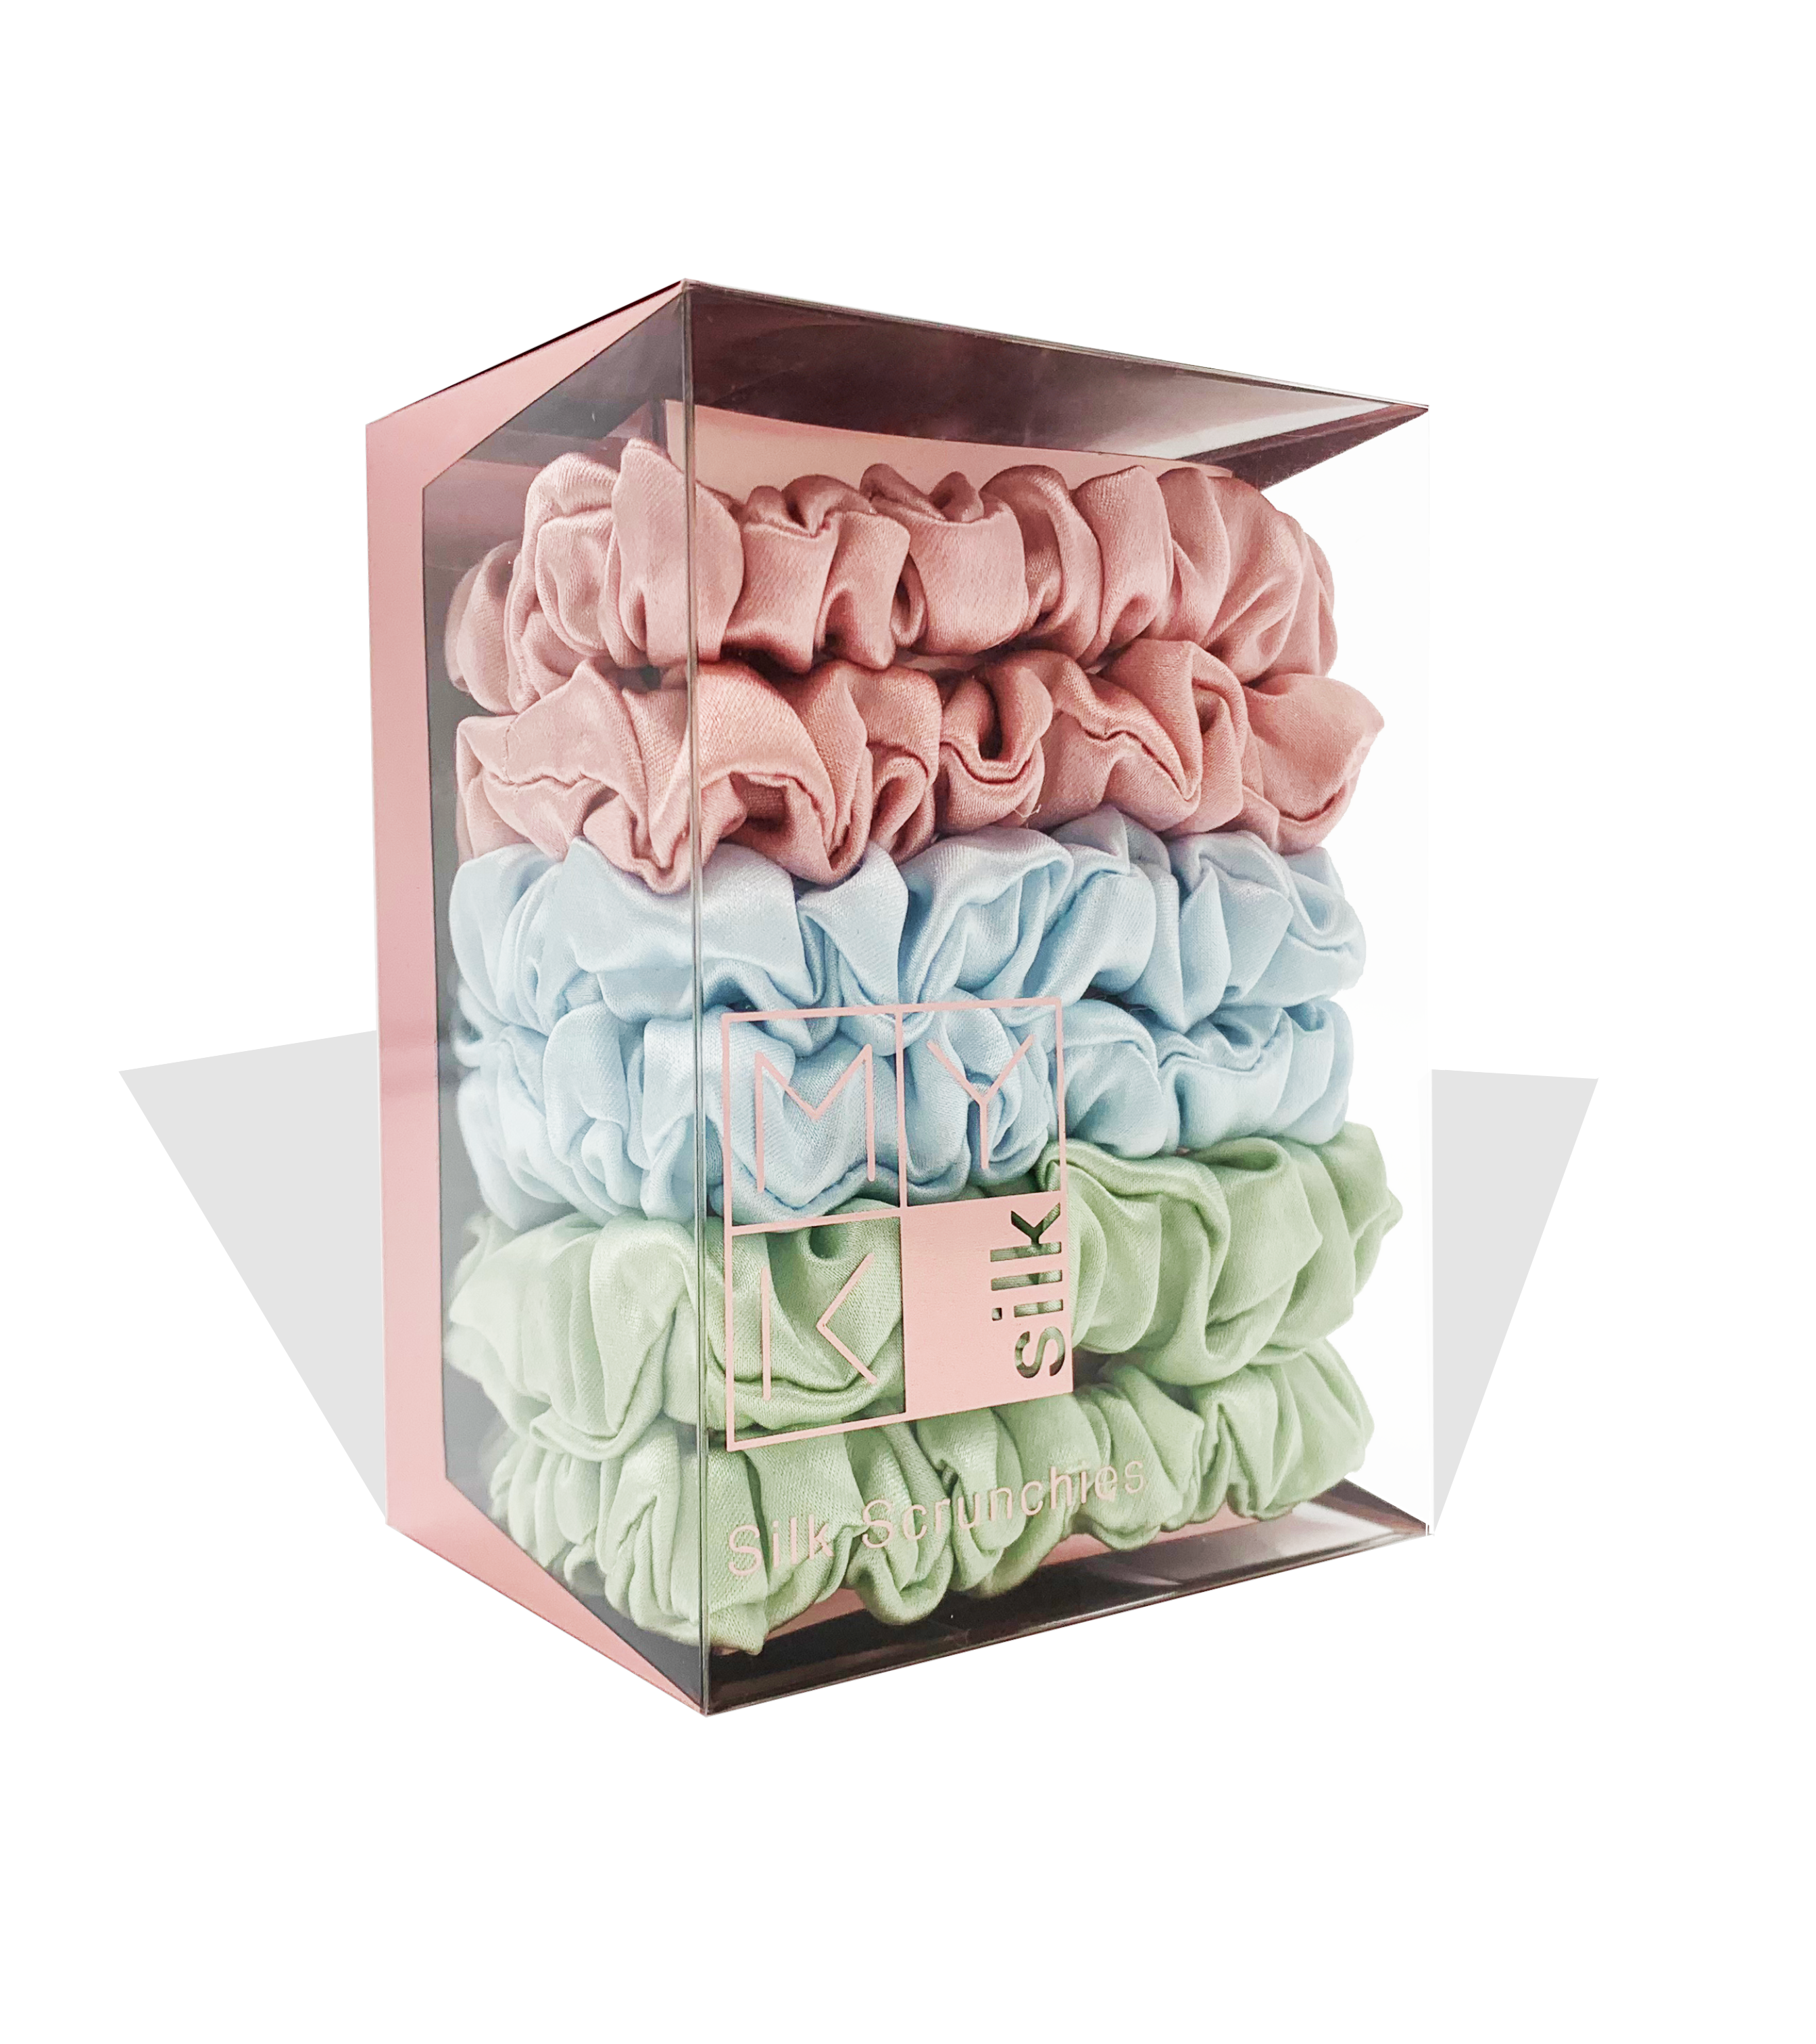 Small Silk Scrunchies (Pack of 6) - MYK Silk #color_pastel pack